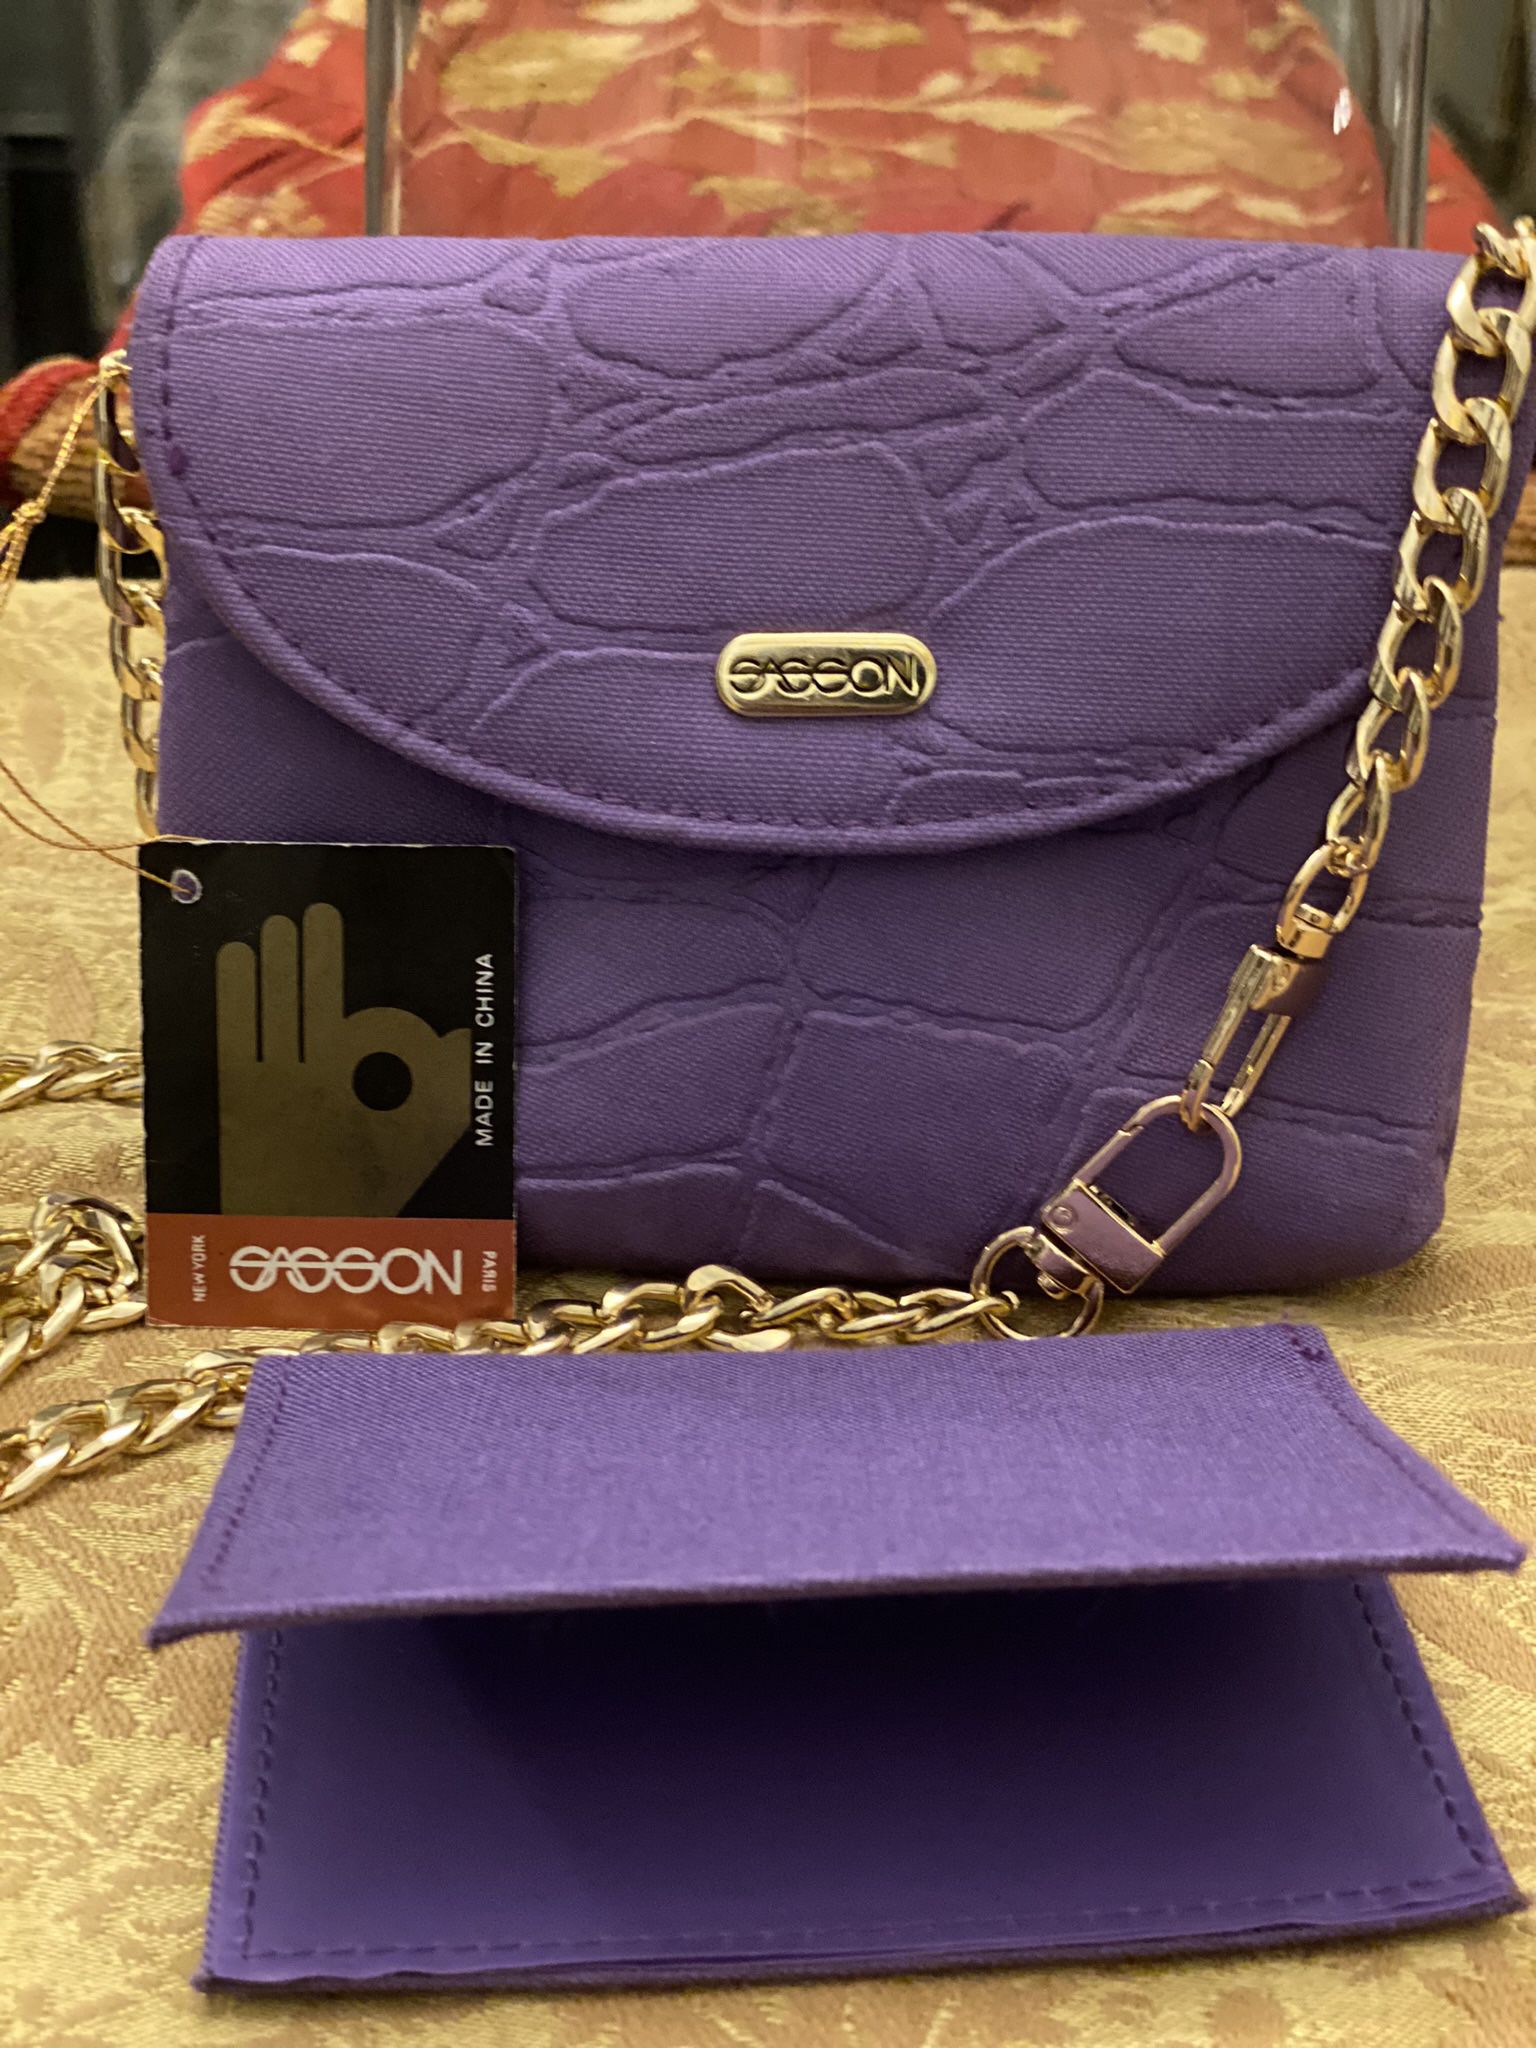 Brand New W/Tags Vintage And Retro Sasson Purple Wallet💜